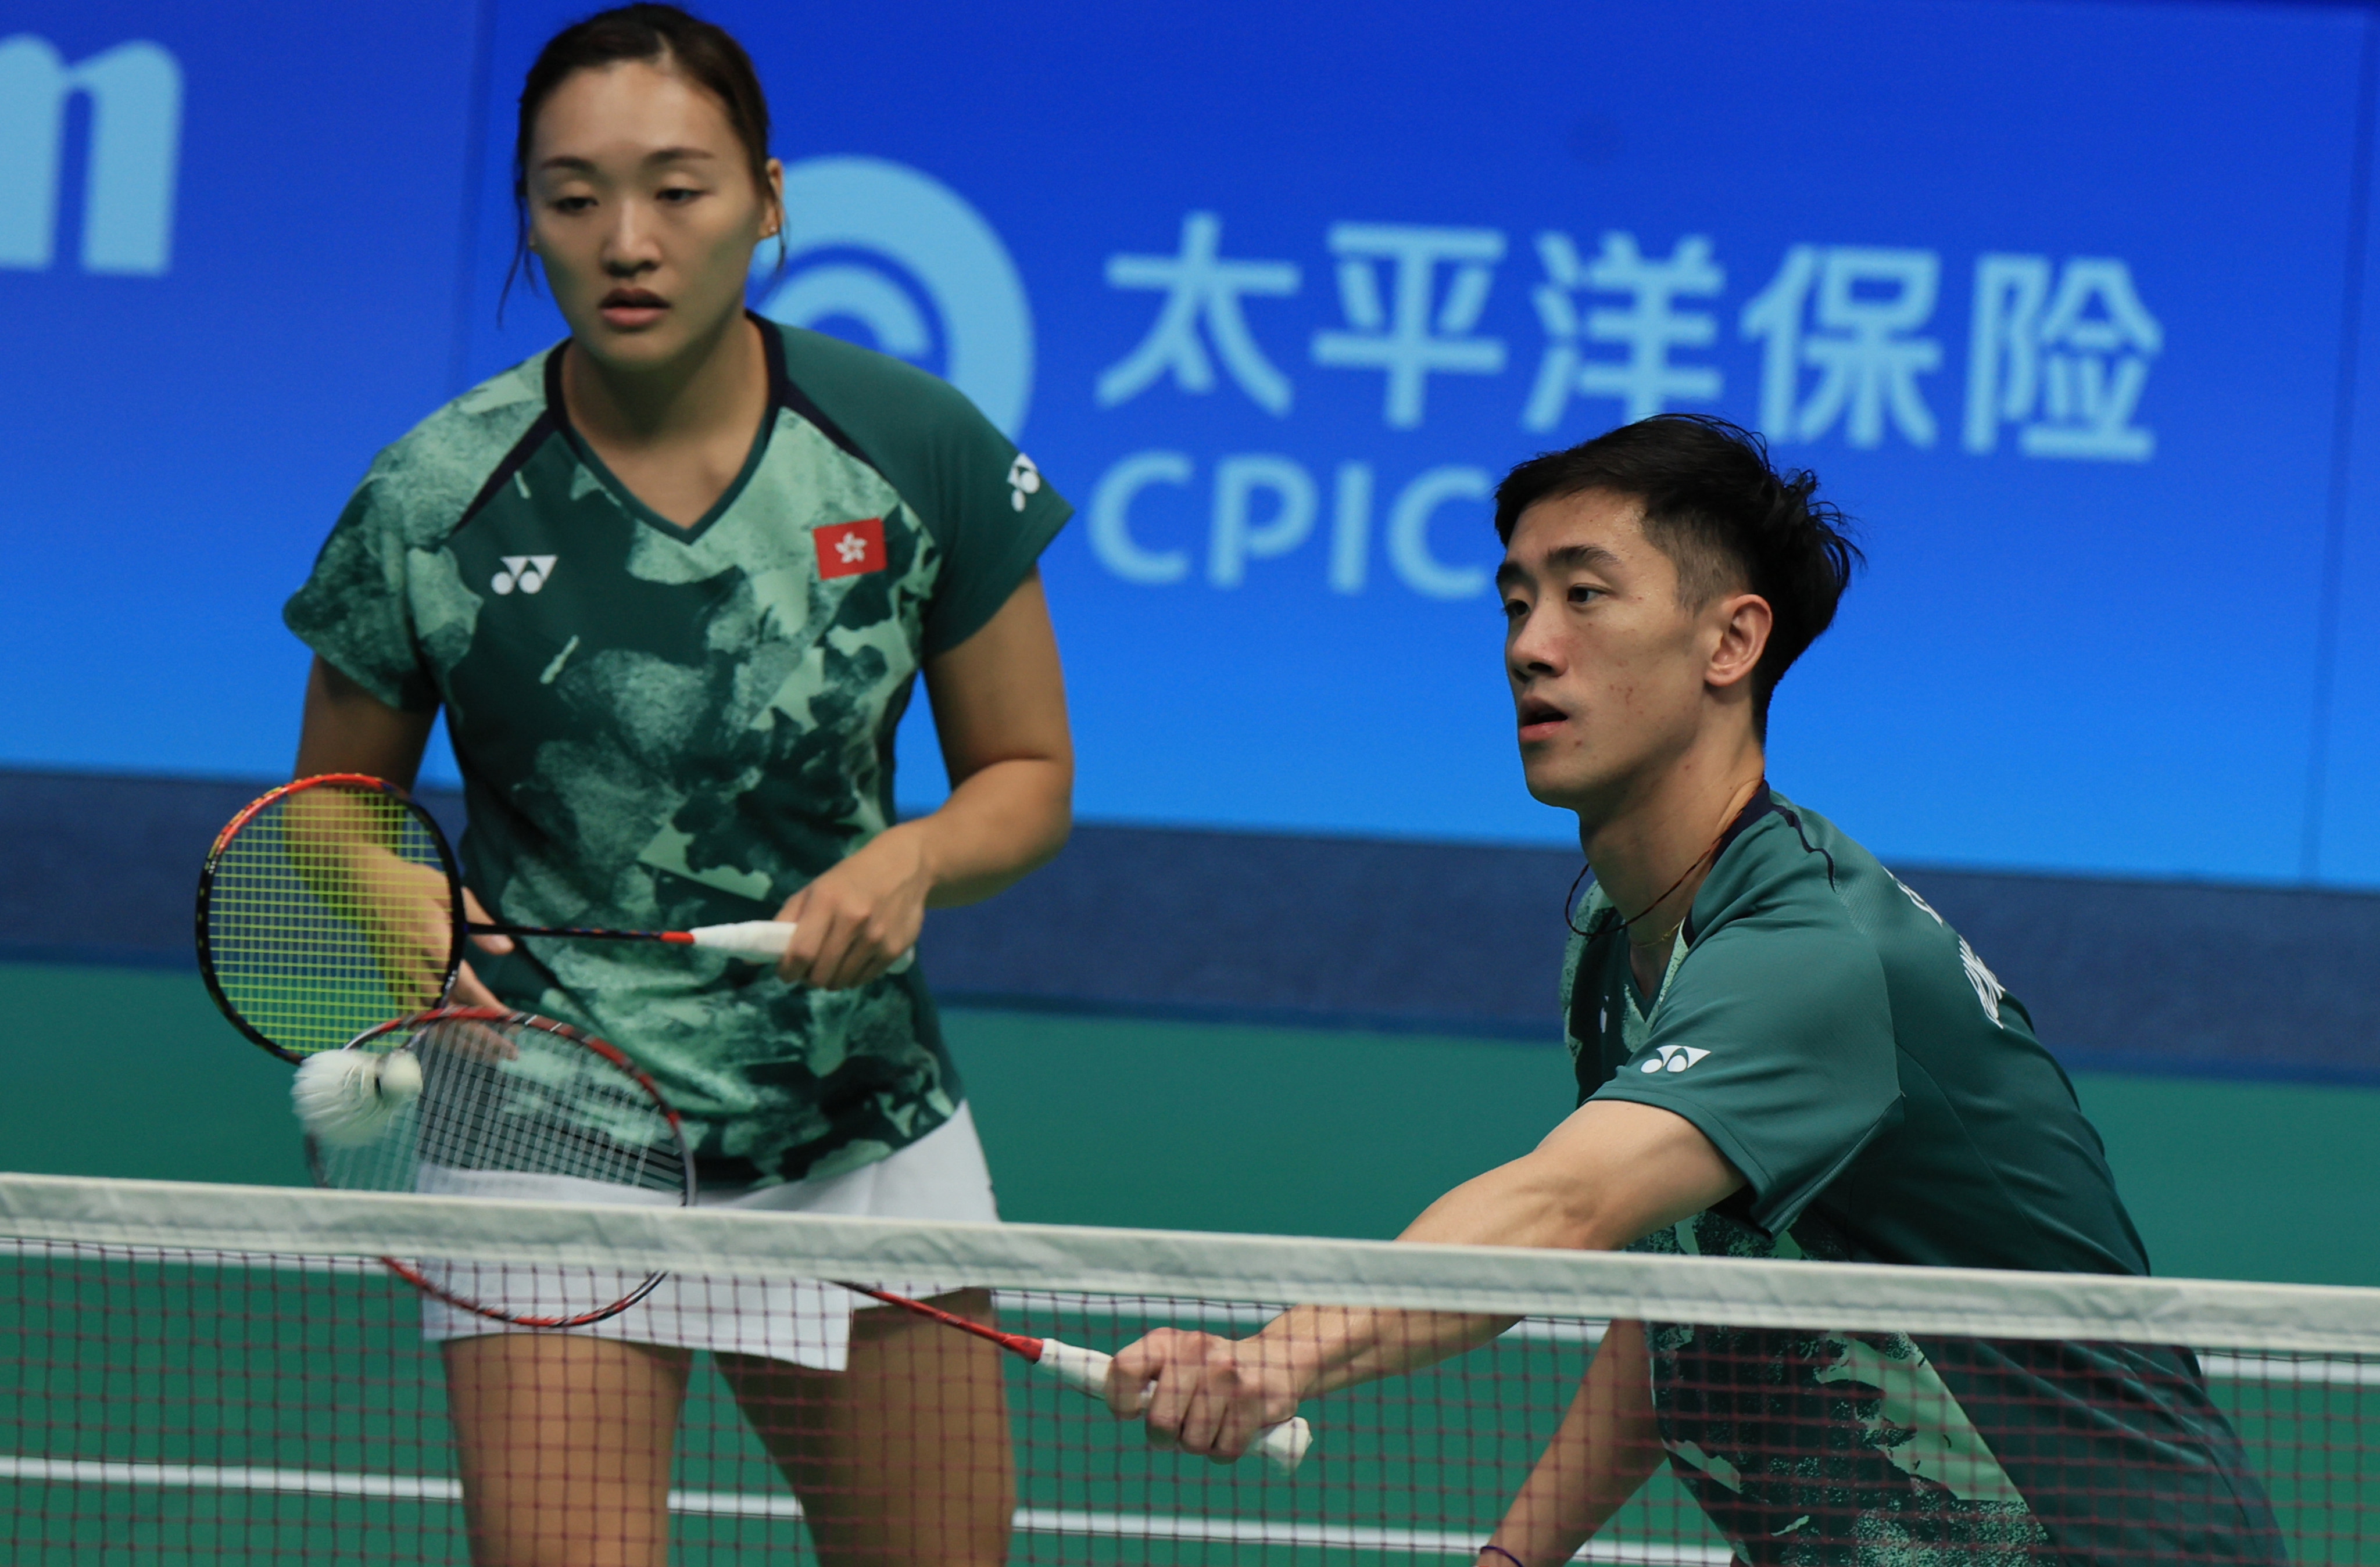 Tang Chun-man and Tse Ying-suet are out after losing their second match. Photo: Dickson Lee